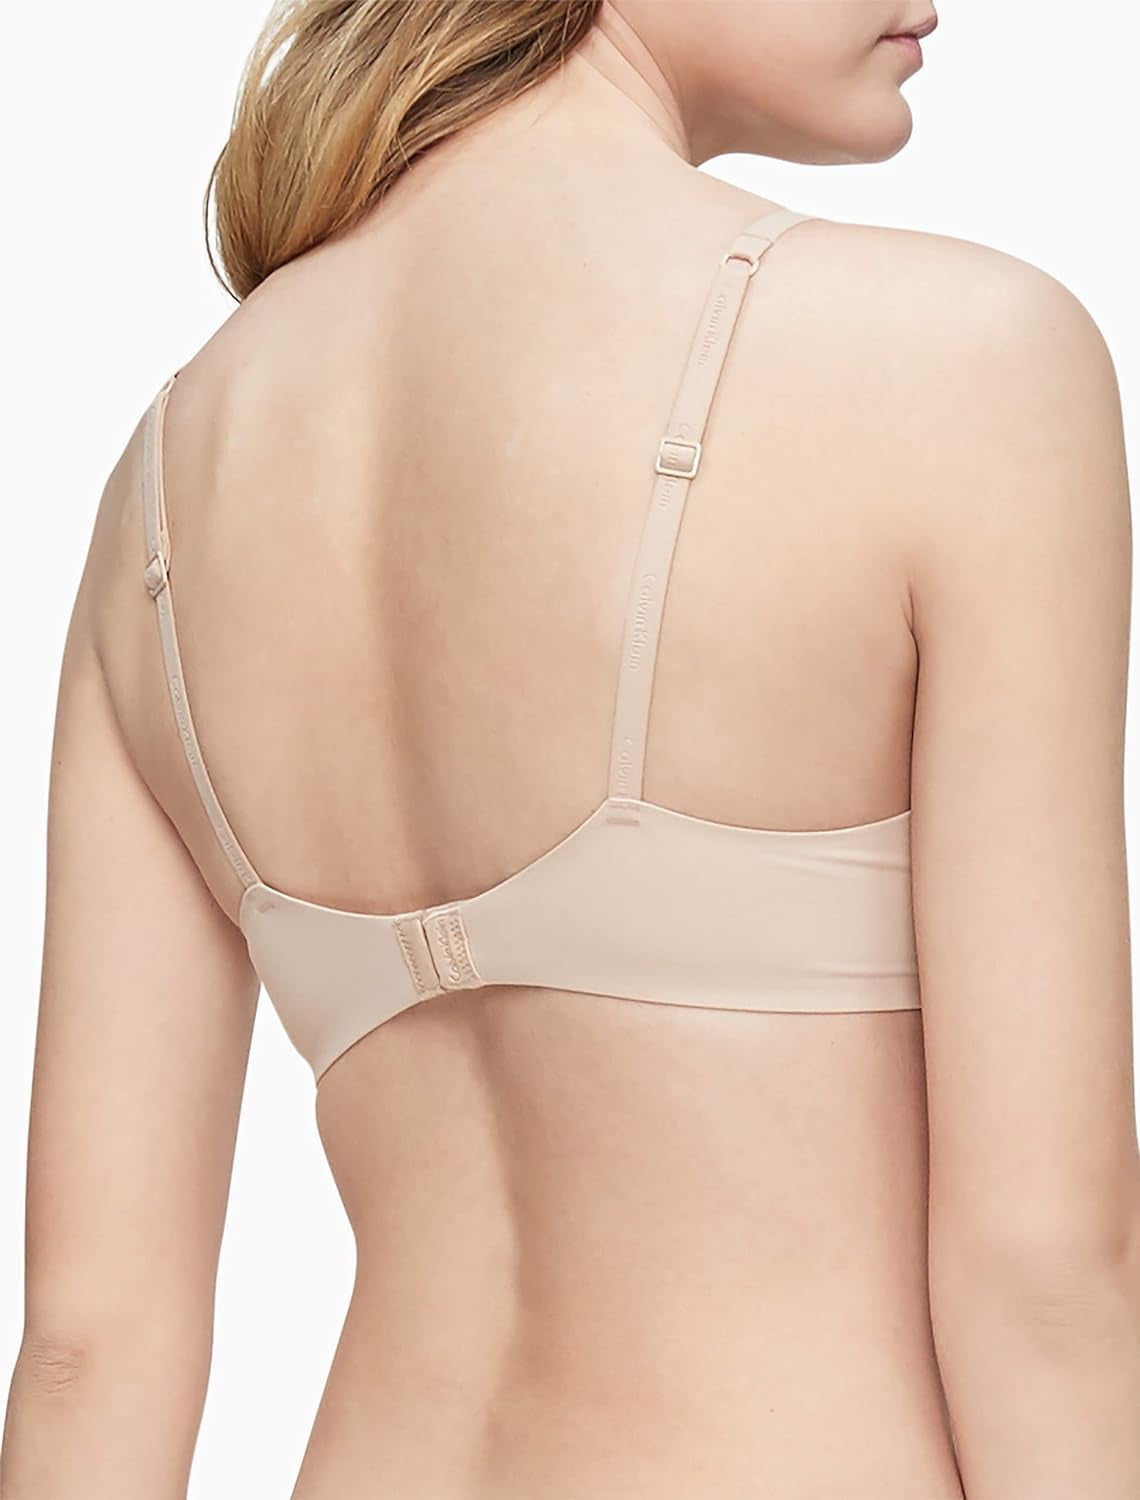 CALVIN KLEIN PERFECTLY FIT BARE WOMEN'S BRA ASSORTED SIZES NEW